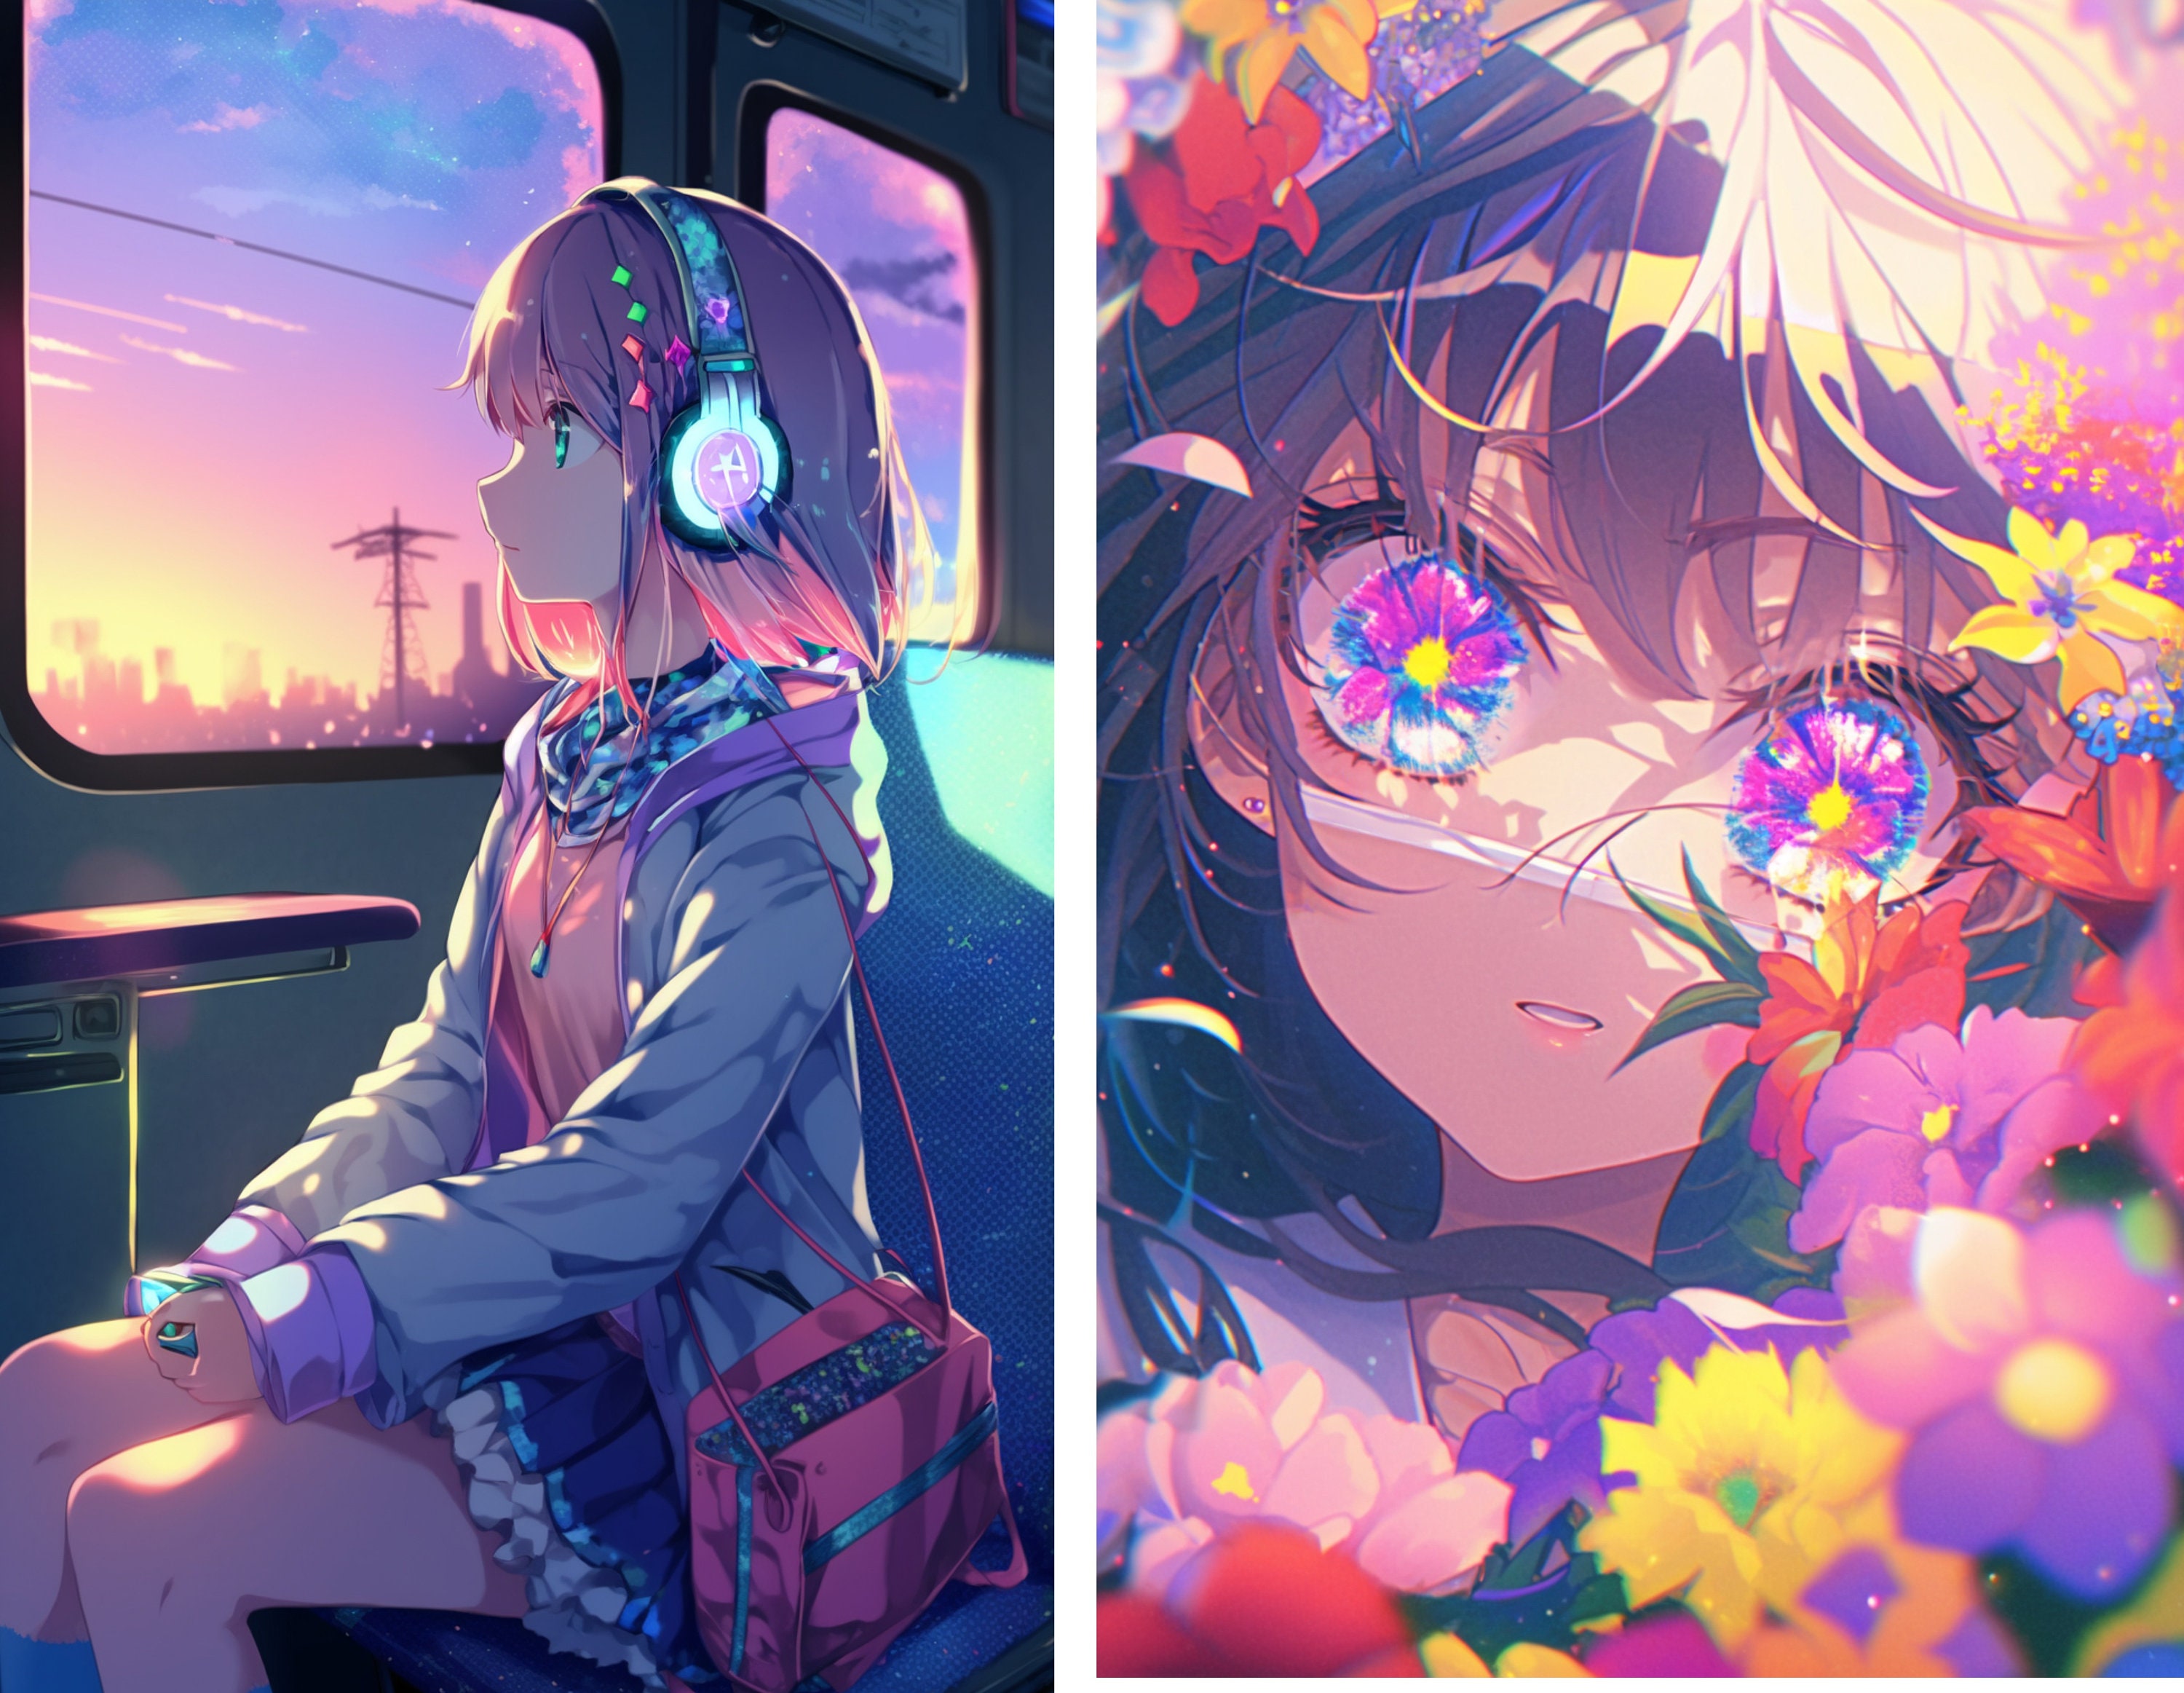 Download A moment of beauty captured in an unforgettable anime art painting  | Wallpapers.com